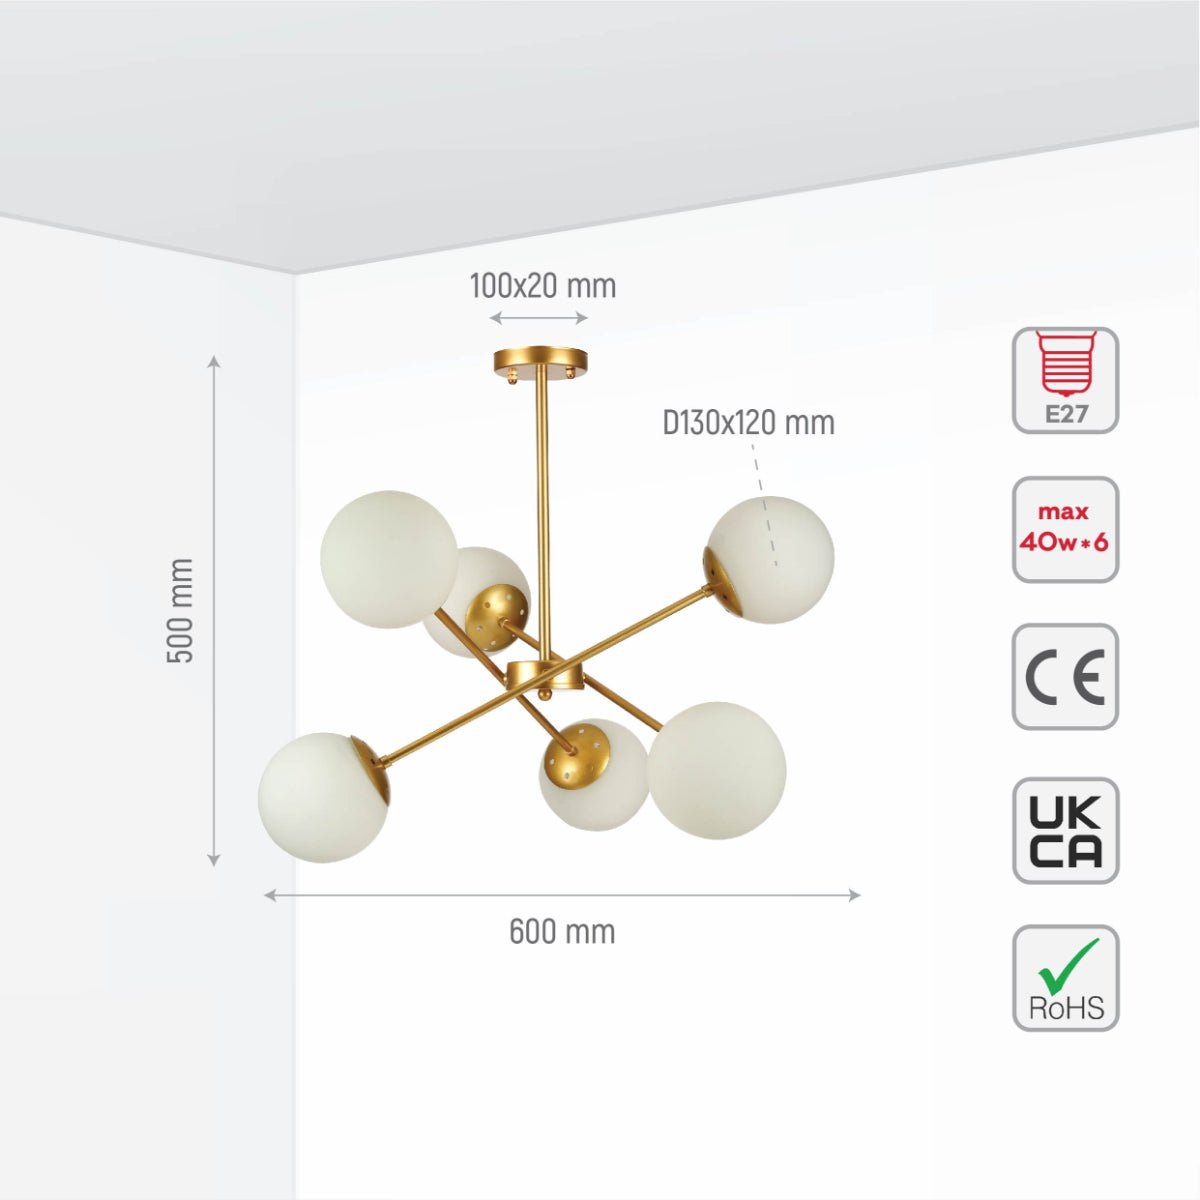 Size and specs of Gold Sputnik Metal Opal Globe Glass Modern Ceiling Light with E27 Fittings | TEKLED 159-17656